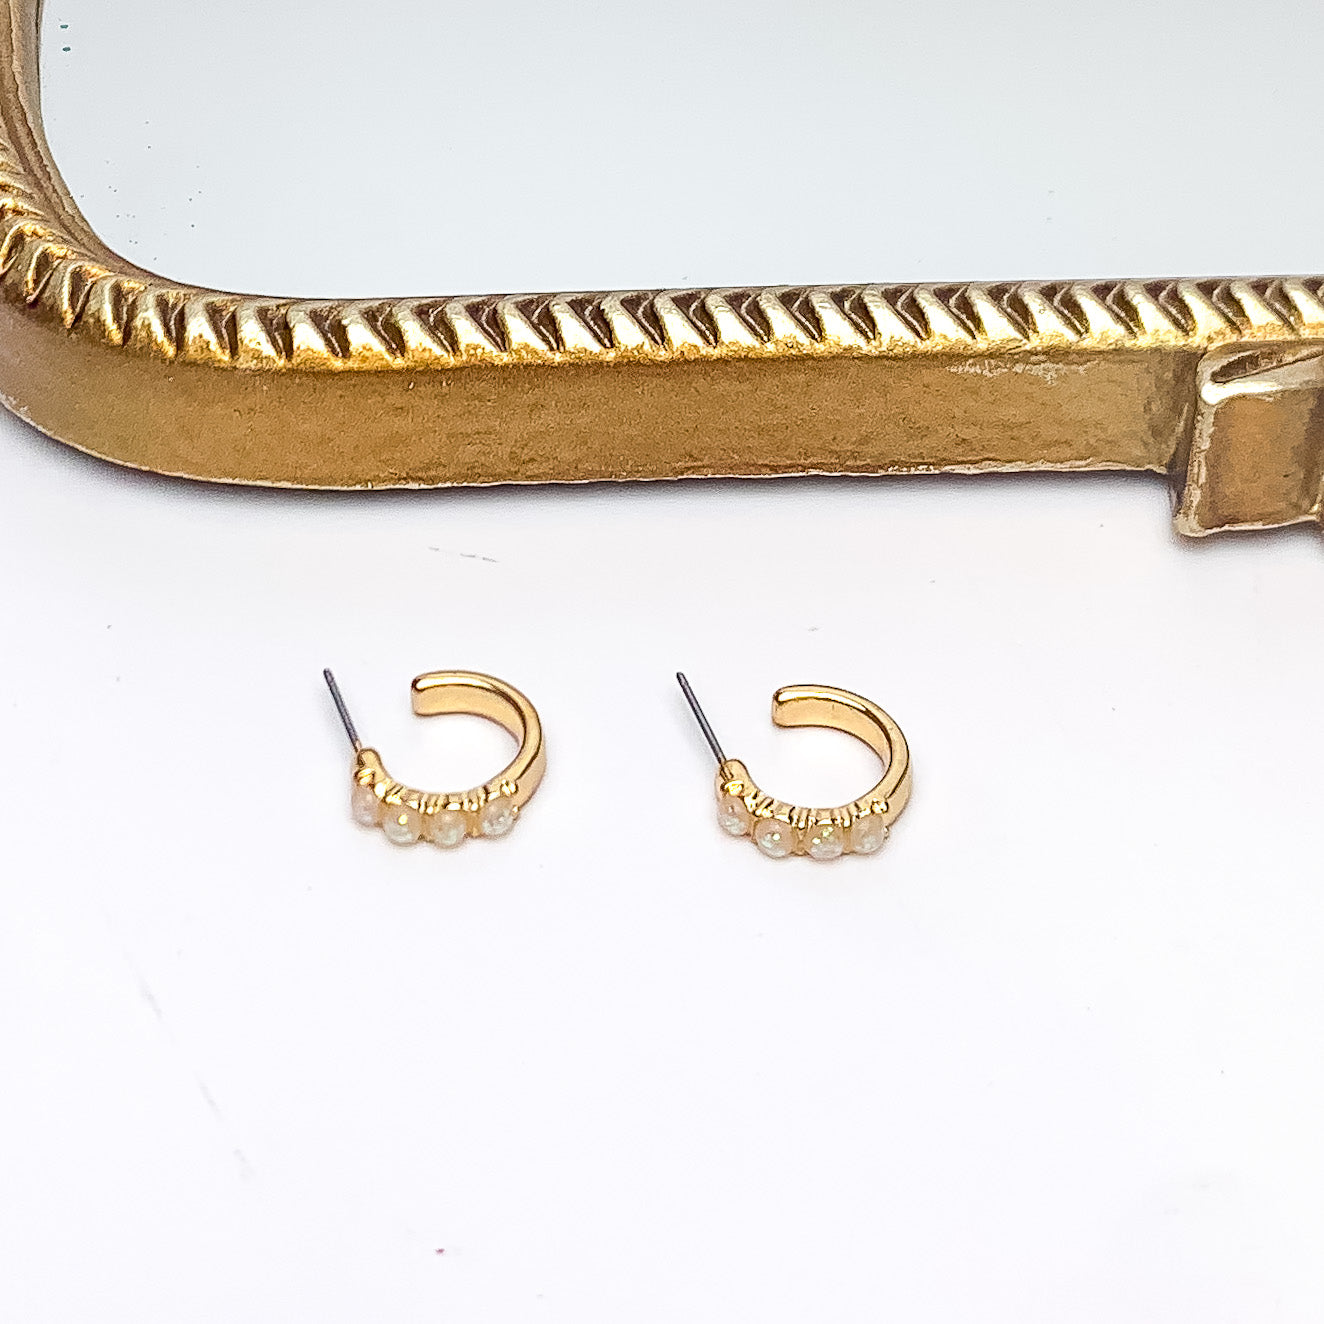 Small Gold Tone Hoop Earrings With Opal Stones. Pictured on a white background with a gold frame above the earrings.